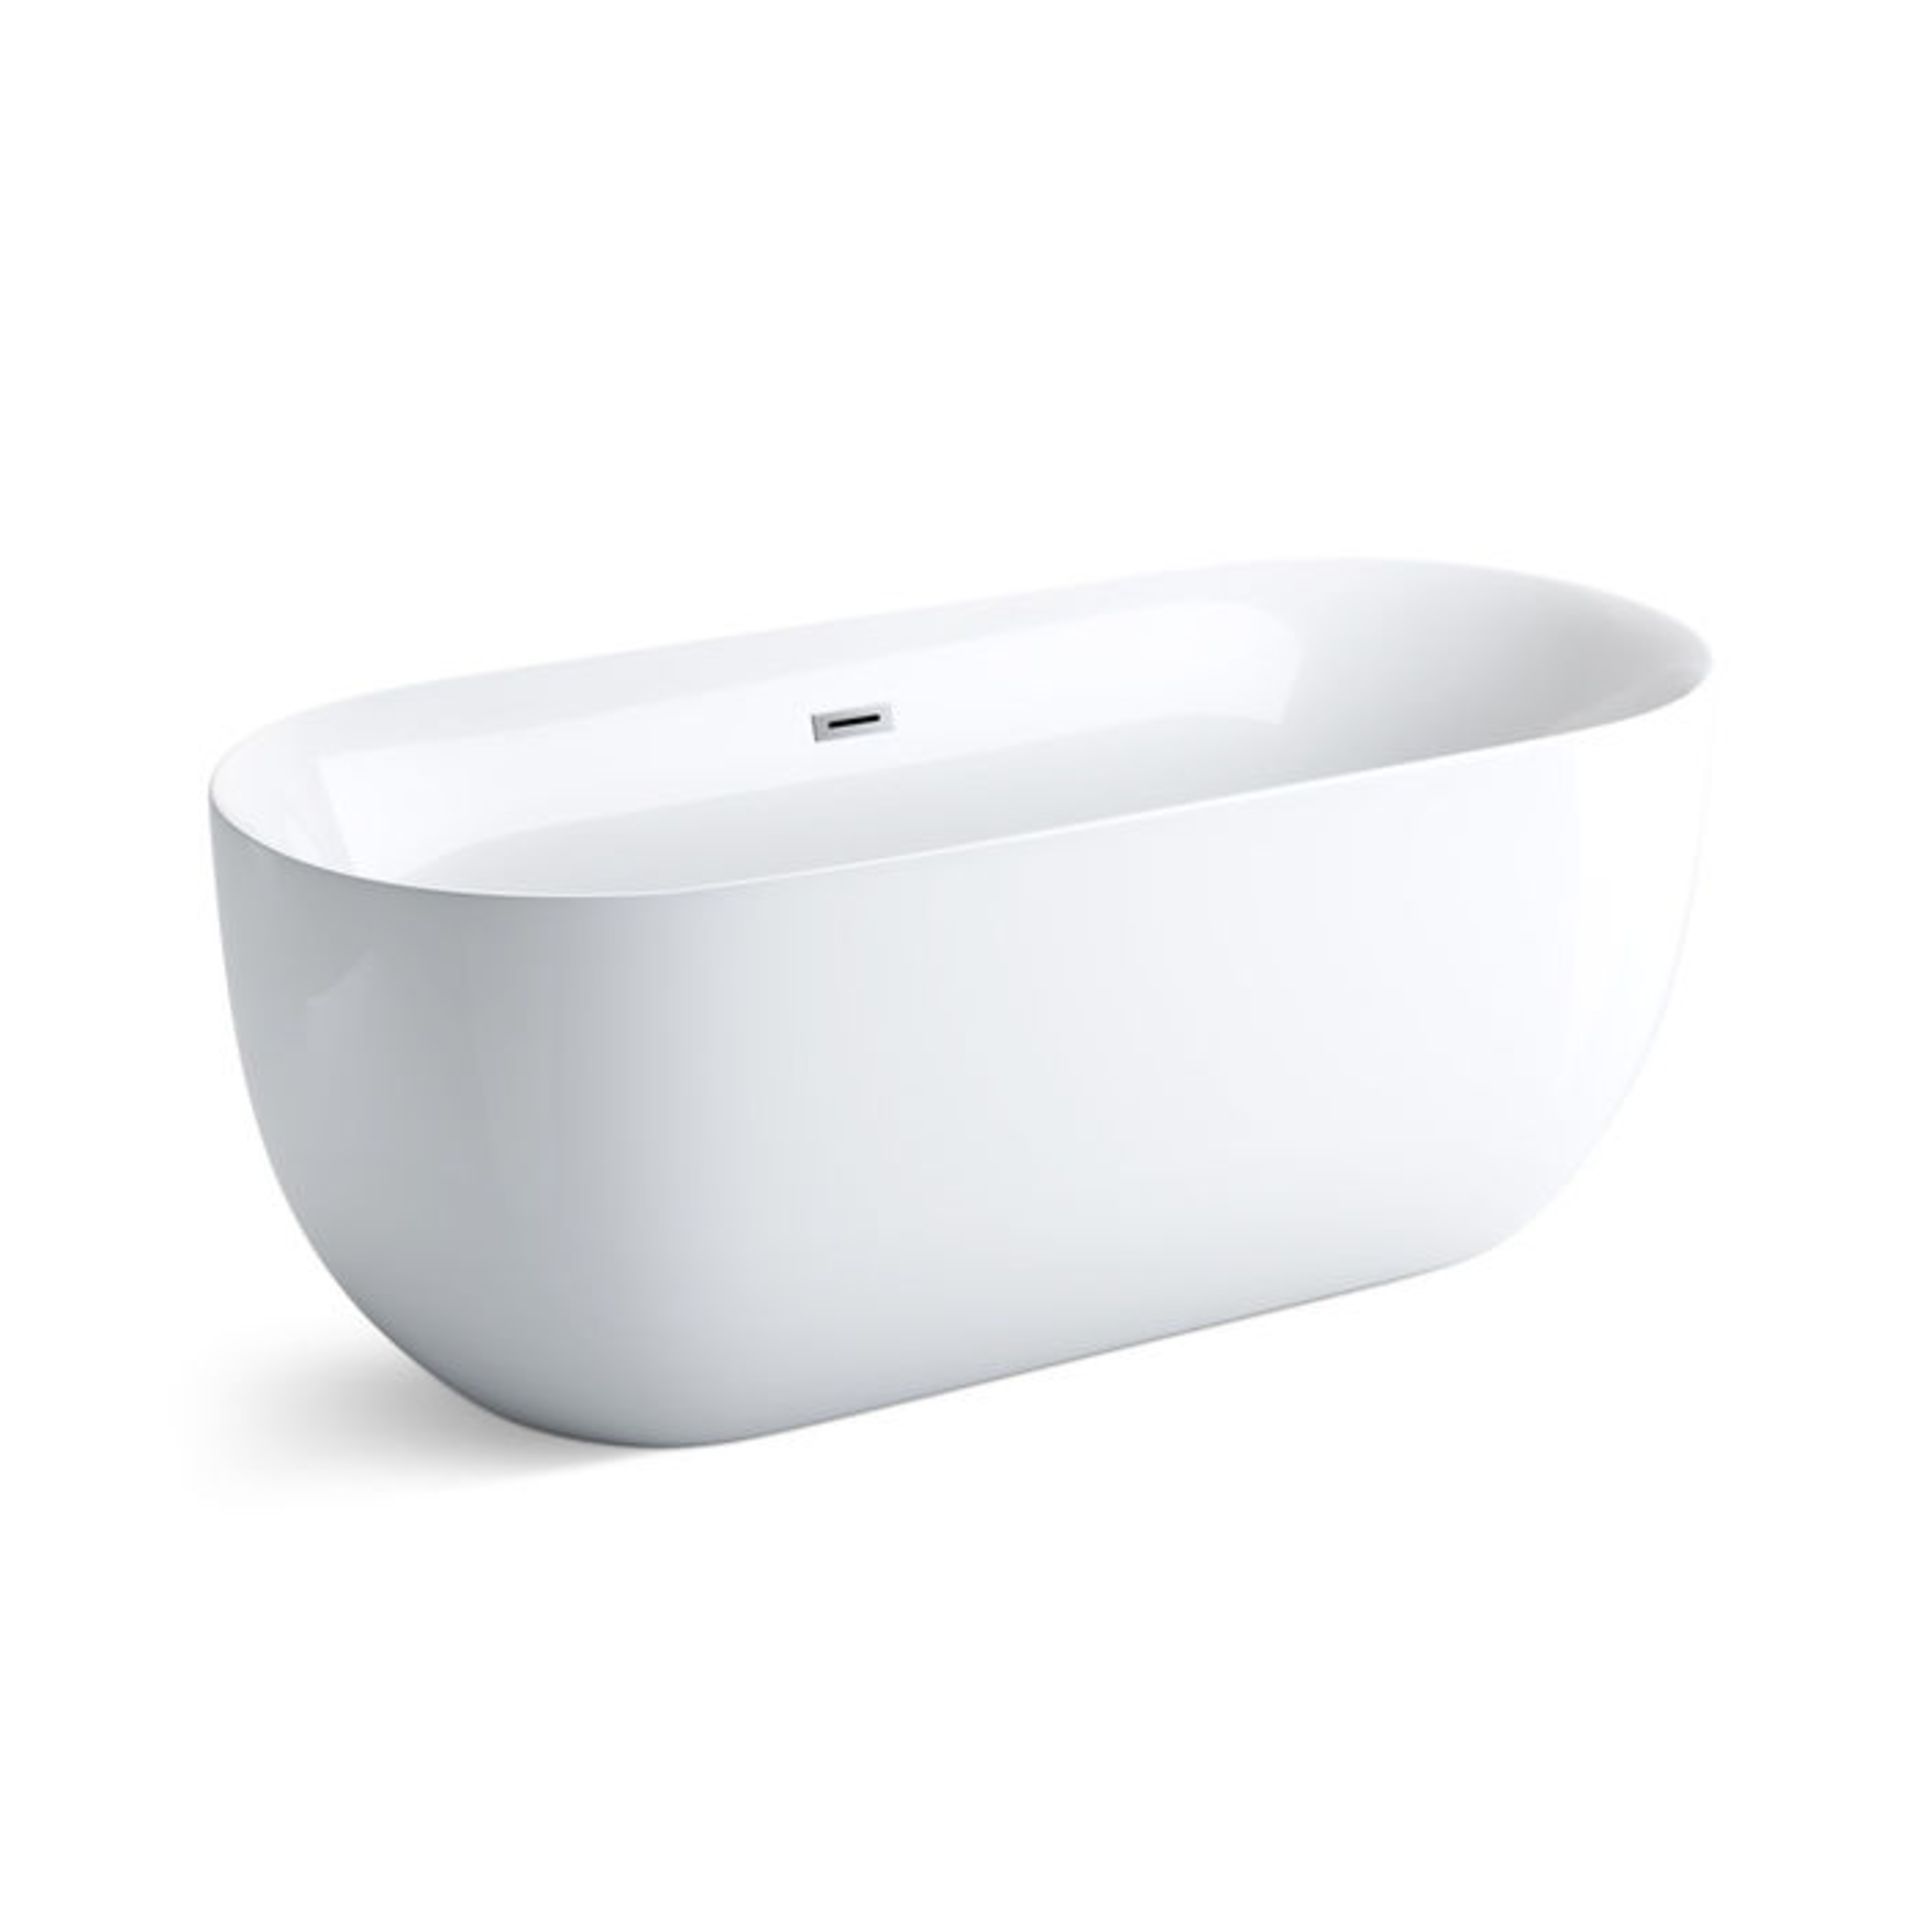 (YC6) 1700mmx780mm Mya Freestanding Bath. Showcasing style charm for a centre piece that's full of - Image 3 of 4